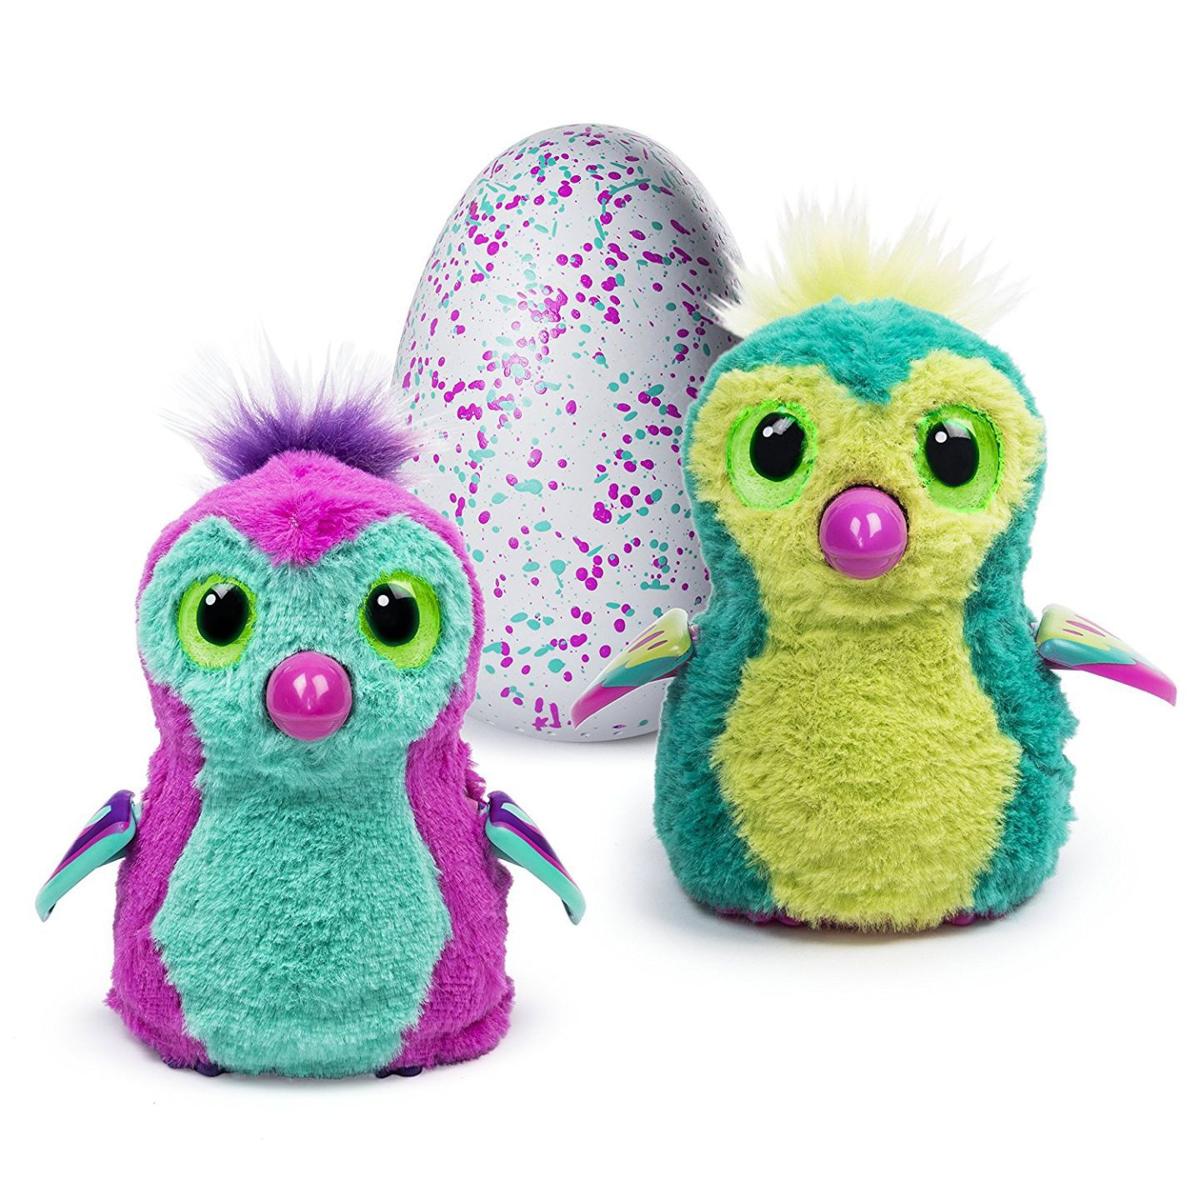 Hunting for a Hatchimal? Technology can help Trends